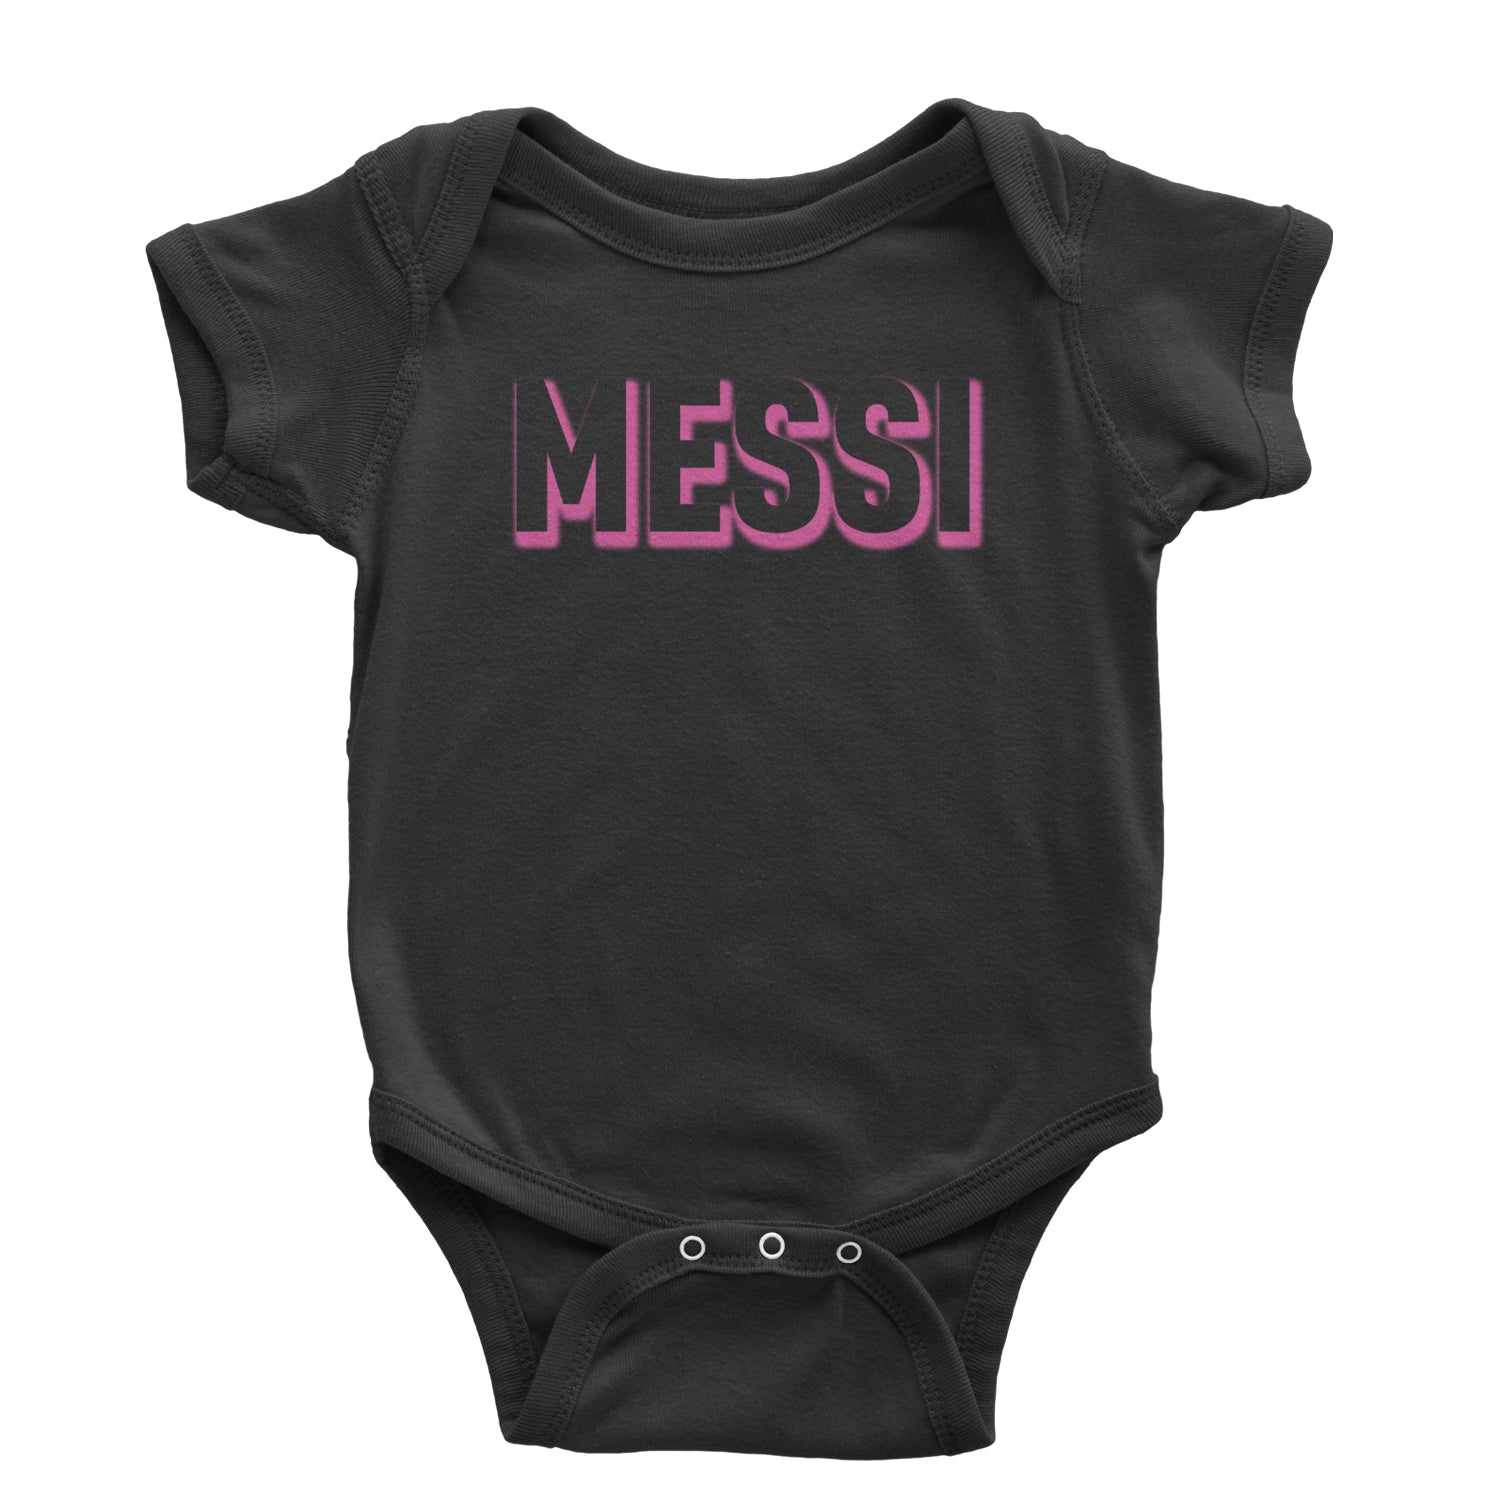 Messi OUTLINE Miami Futbol Infant One-Piece Romper Bodysuit and Toddler T-shirt